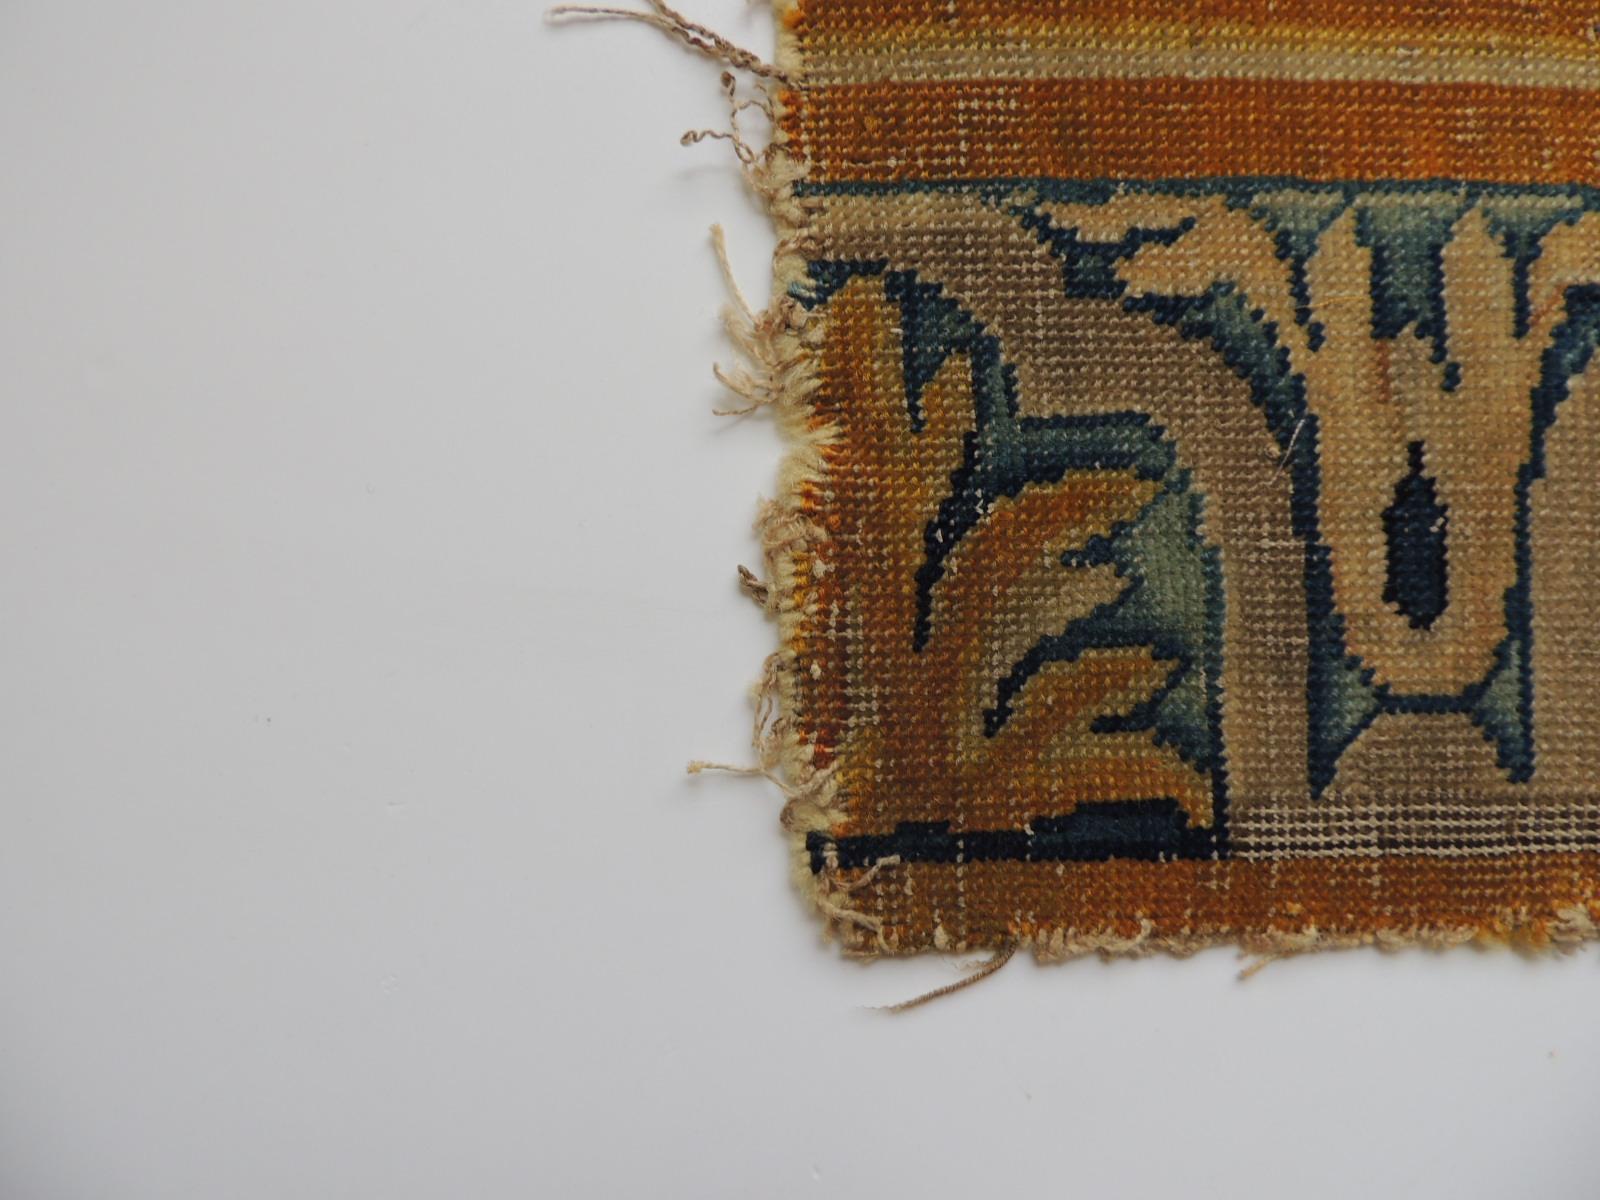 Antique gold and blue Savonnerie rug fragment.
Scrolling fragment with and urn and pastel blue coloration.
Small hole from aged.
Ideal to frame or to make a pillow.
Size: 7.5